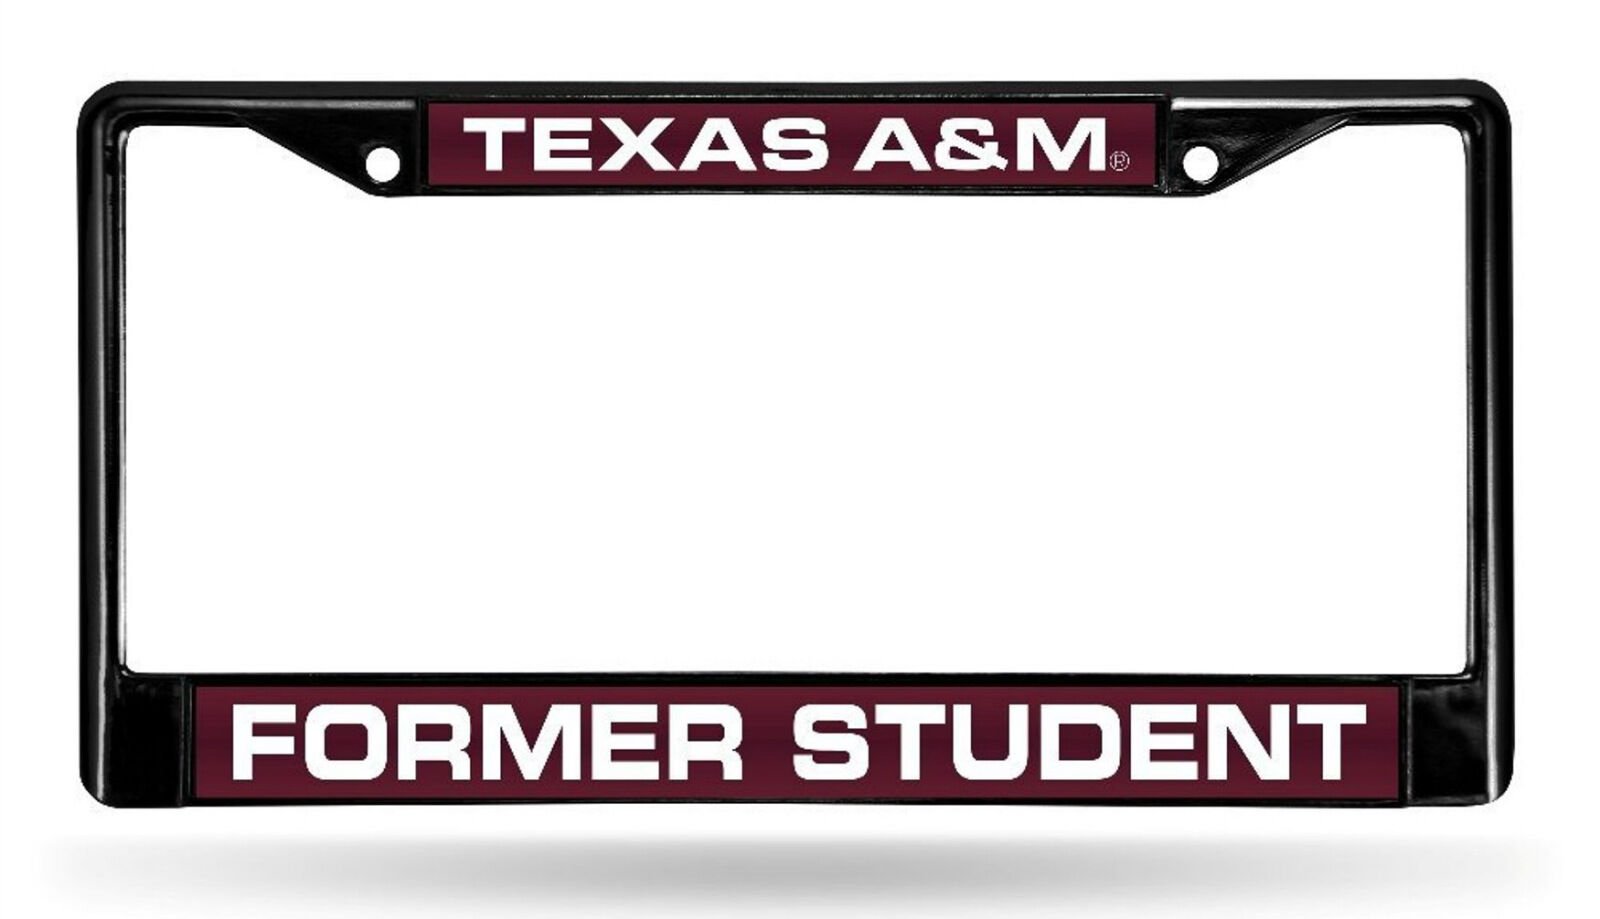 Texas A&M University Aggies Black Metal License Plate Frame Tag Cover, Laser Acrylic Mirrored Inserts, 12x6 Inch